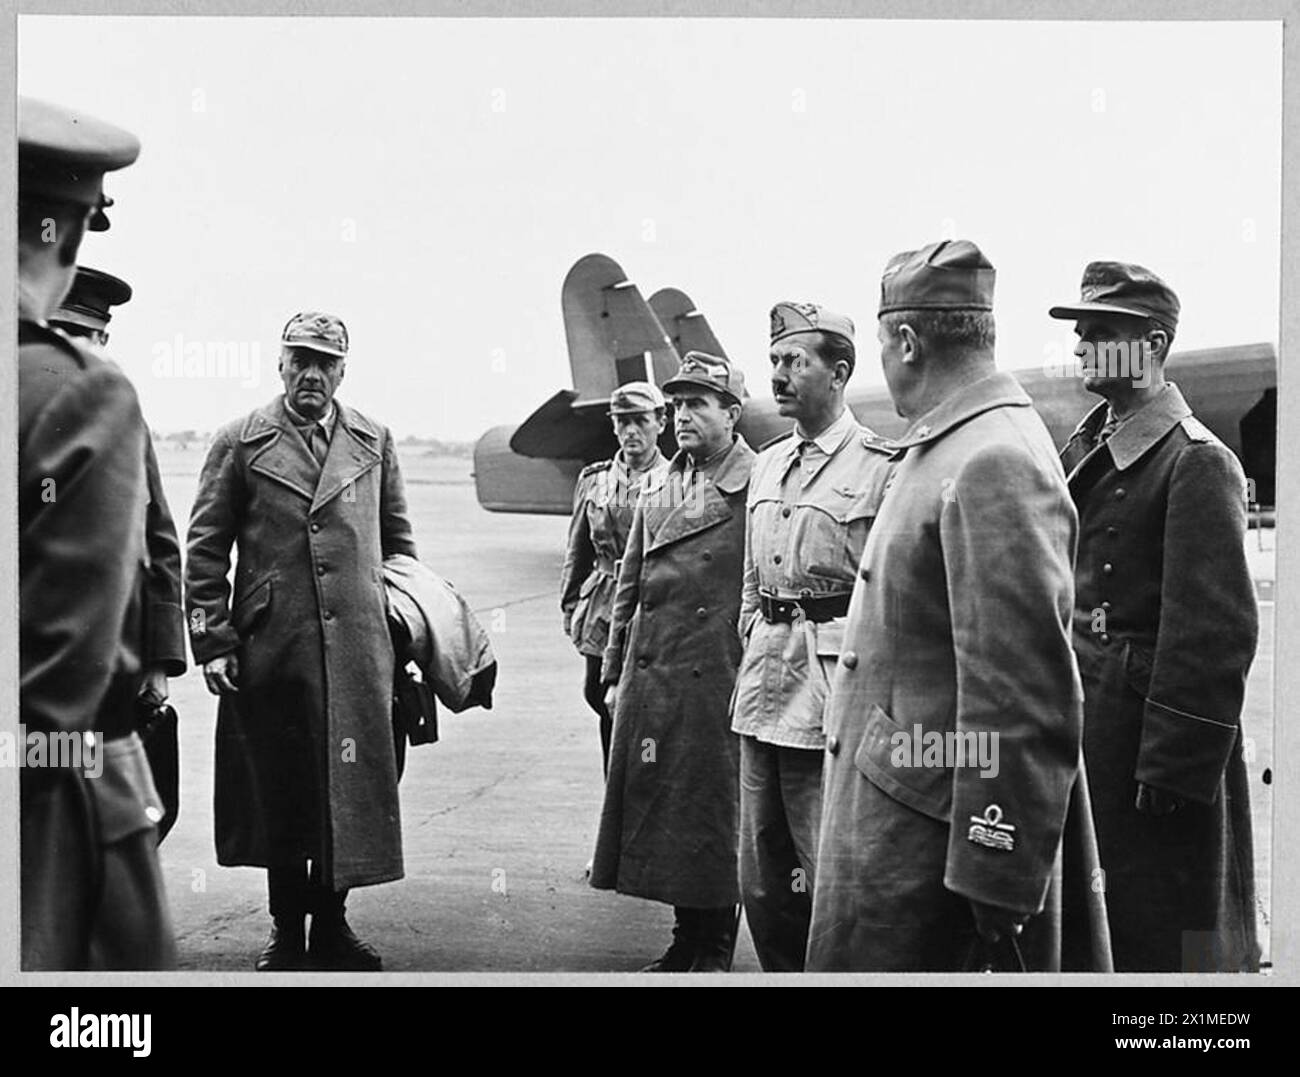 AXIS GENERALS ARRIVE IN SOUTH OF ENGLAND AS PRISONERS OF WAR. - 9958. Picture (issued 1943) shows - left to right - General Costa; Captain Colombo; Brigadier General Mancinelli; Brigadier General Boschi; Brigadier General Aporti and Colonel von Hulsen, awaiting instructions from the receiving officers, Royal Air Force Stock Photo